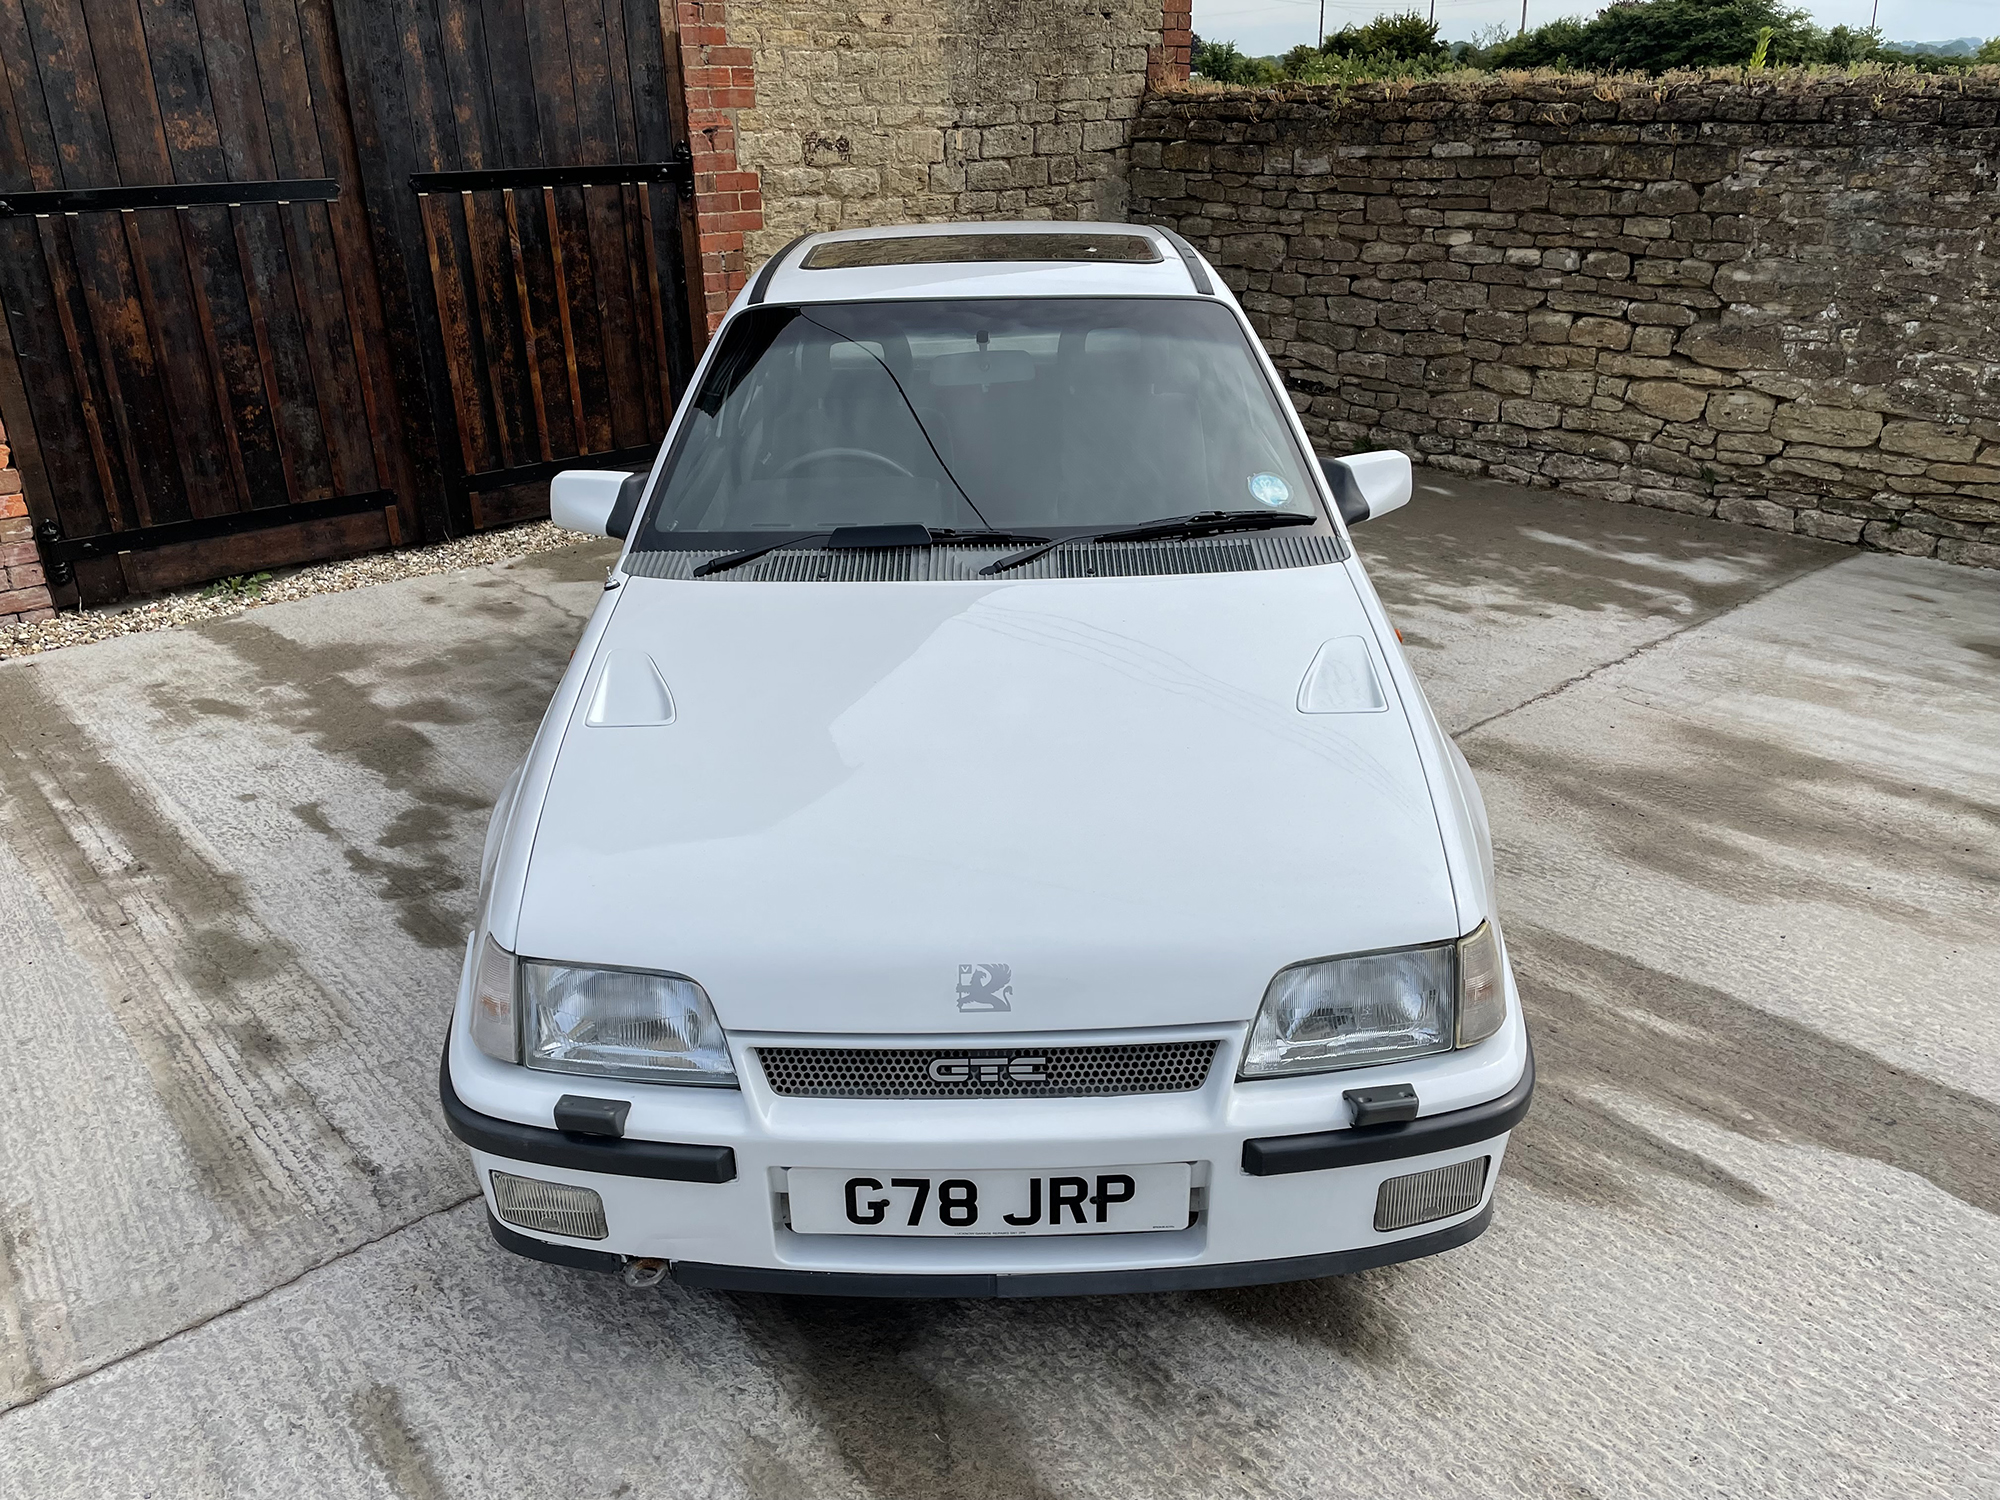 1989 Vauxhall Astra GTE 8V Reg. no. G78 JRP Chassis no. W0L000043LE112697 - Image 2 of 18